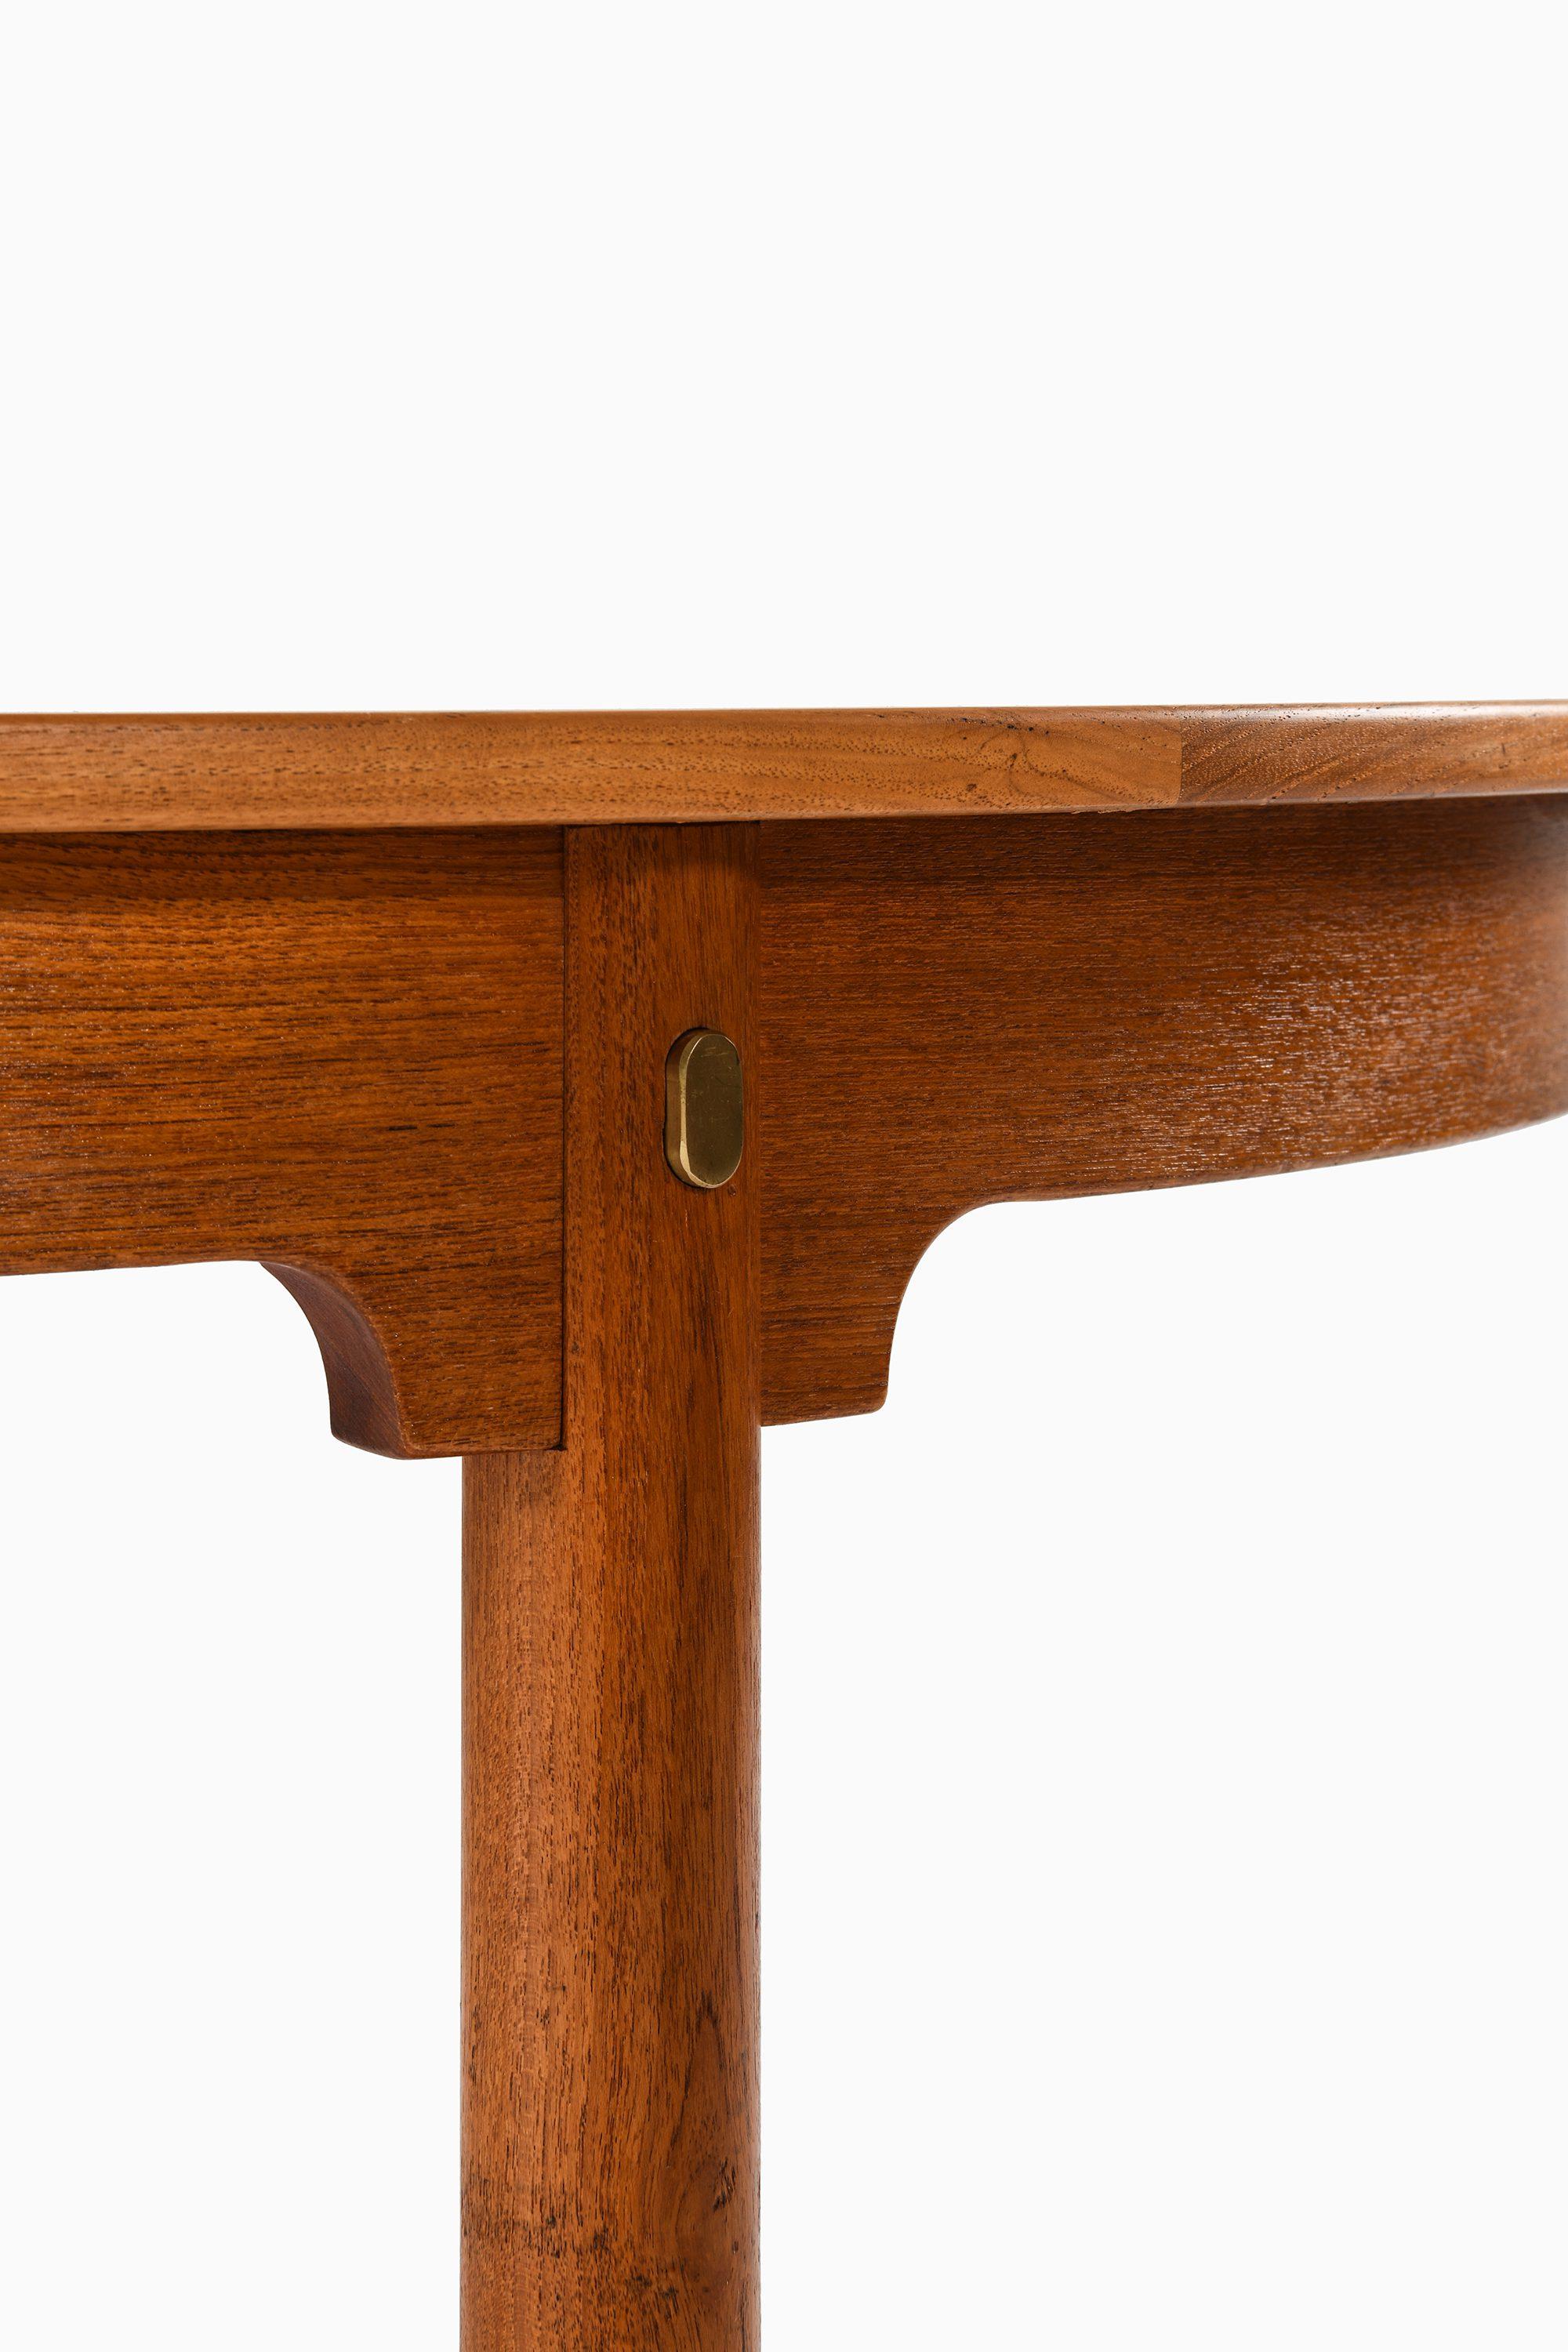 Swedish Dining Table in Teak and Brass by Børge Mogensen, 1959 For Sale